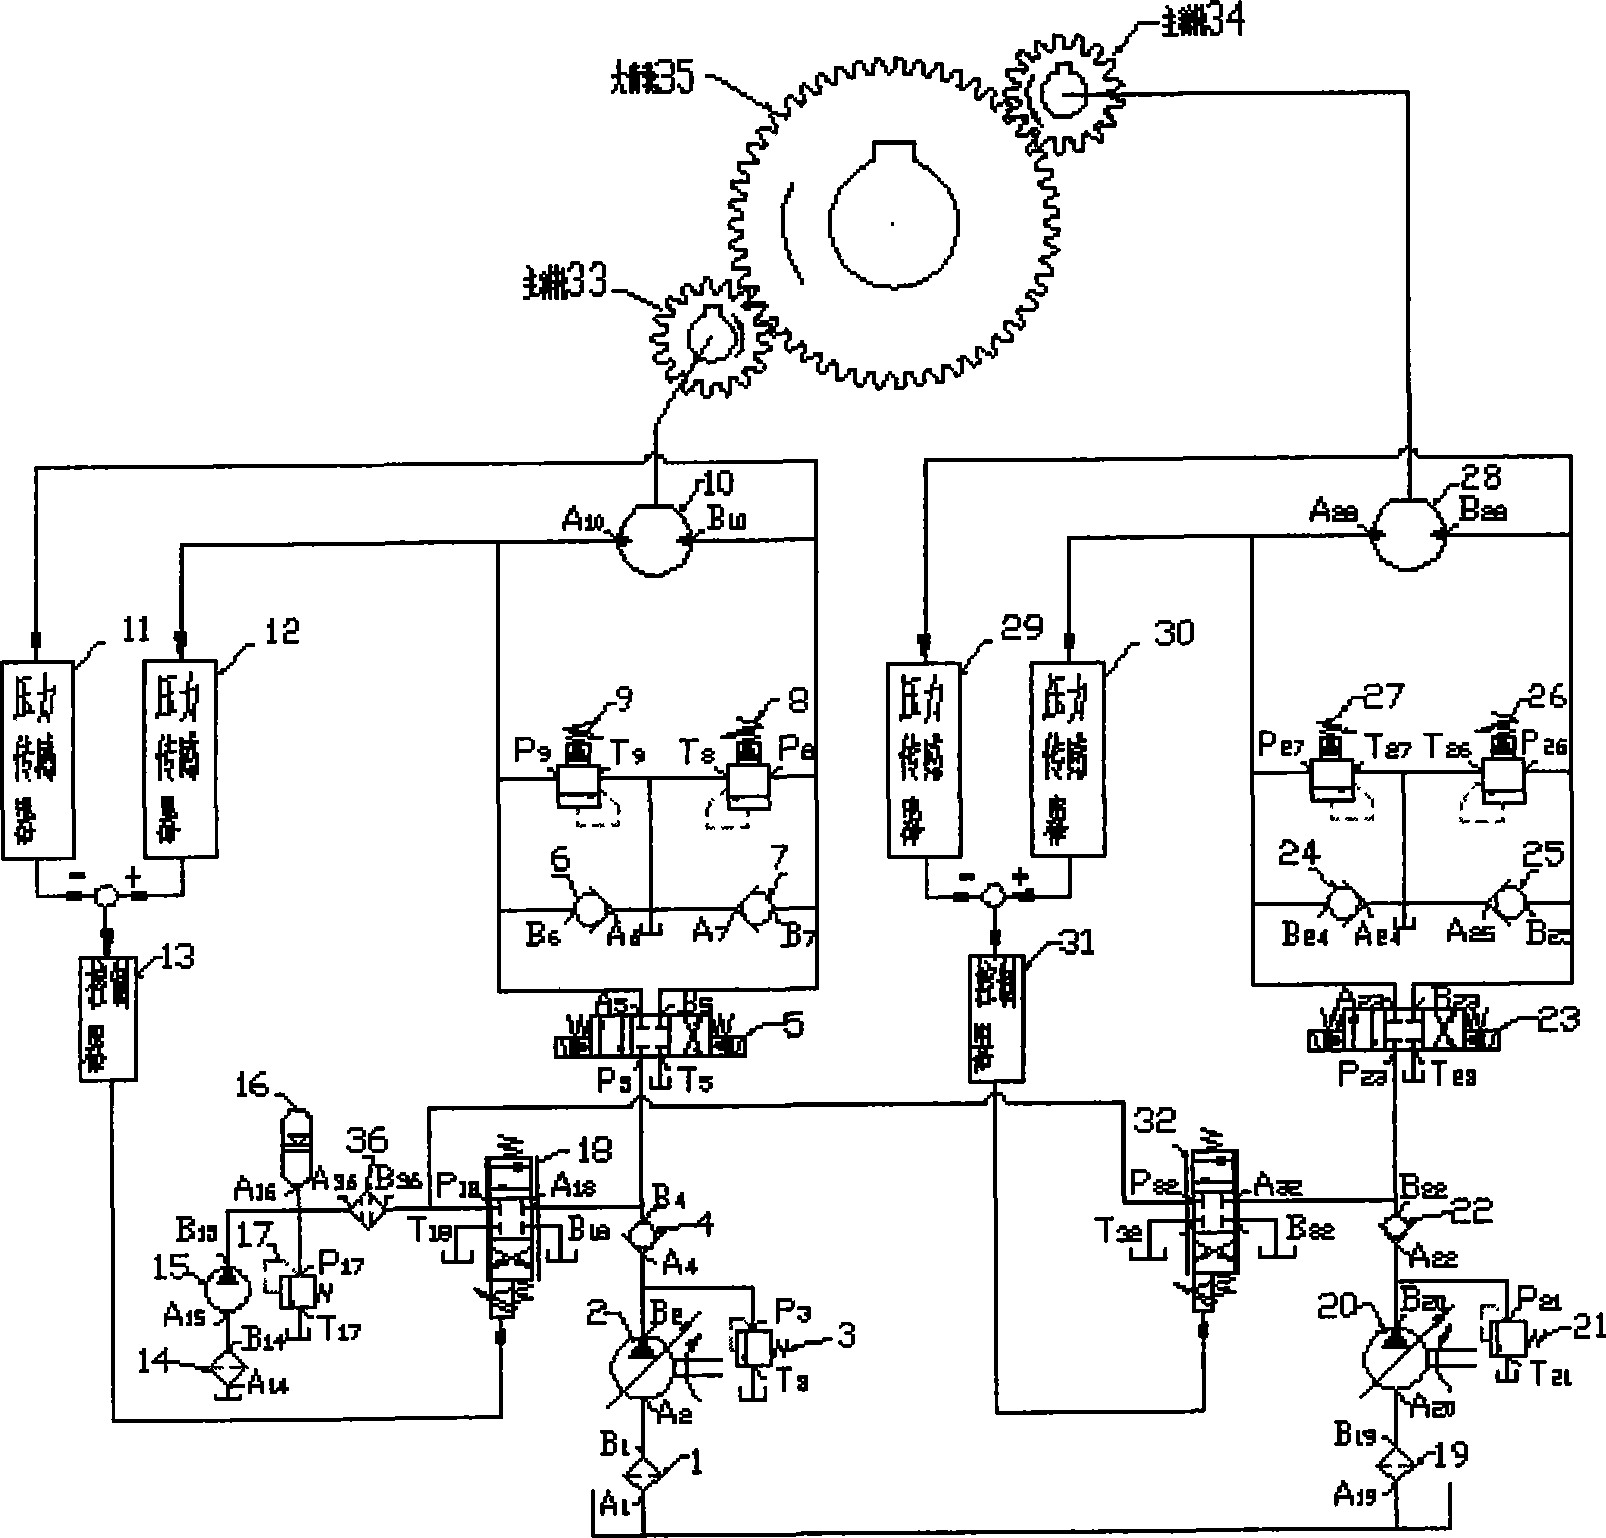 Hydraulic synchronous driving system based on pressure feedback